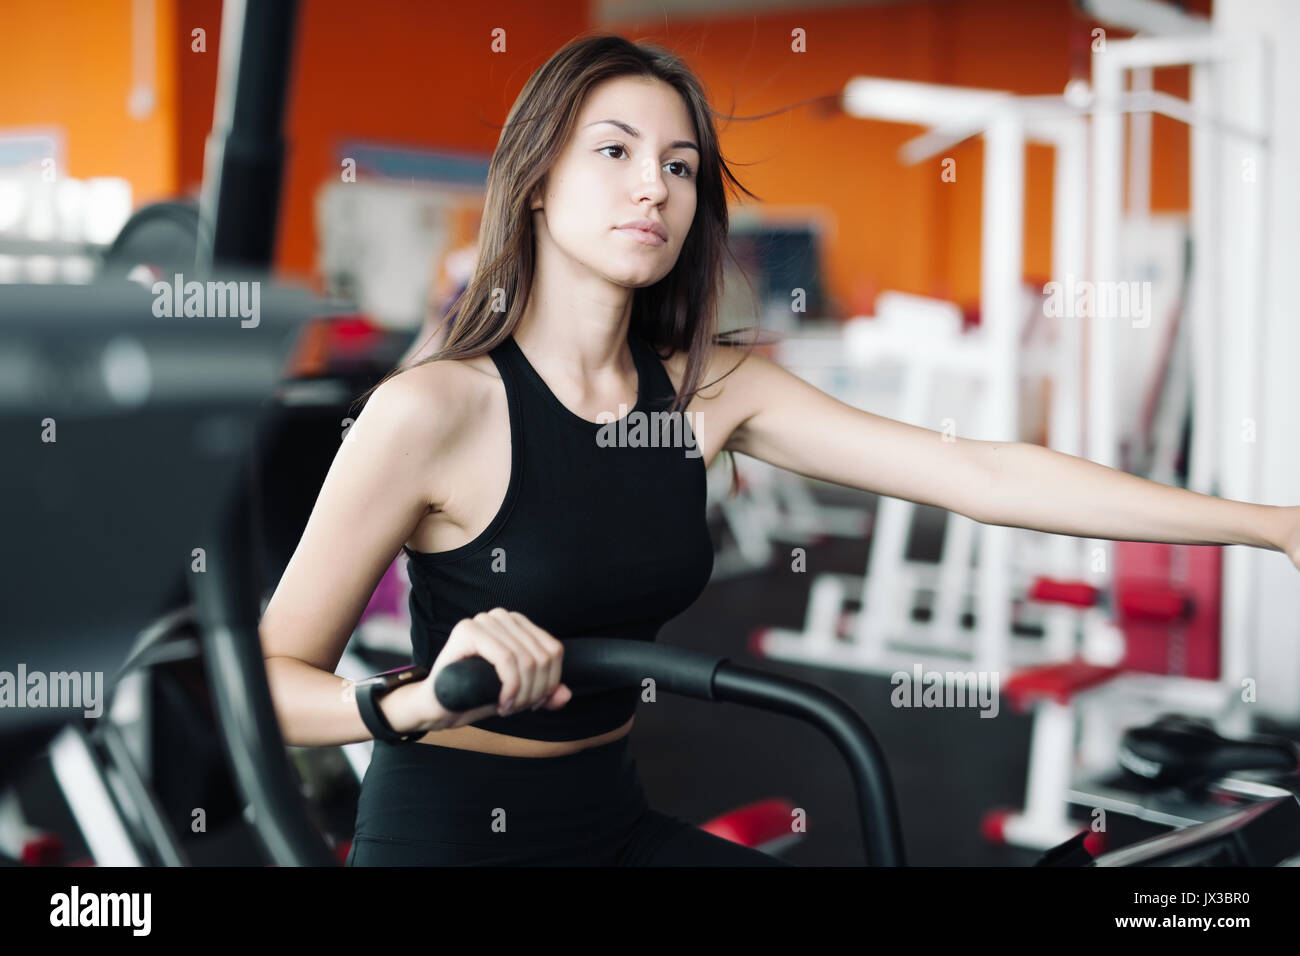 Young beautiful white girl in black sports suit is engaged on a stationary bike in the fitness club. Stock Photo